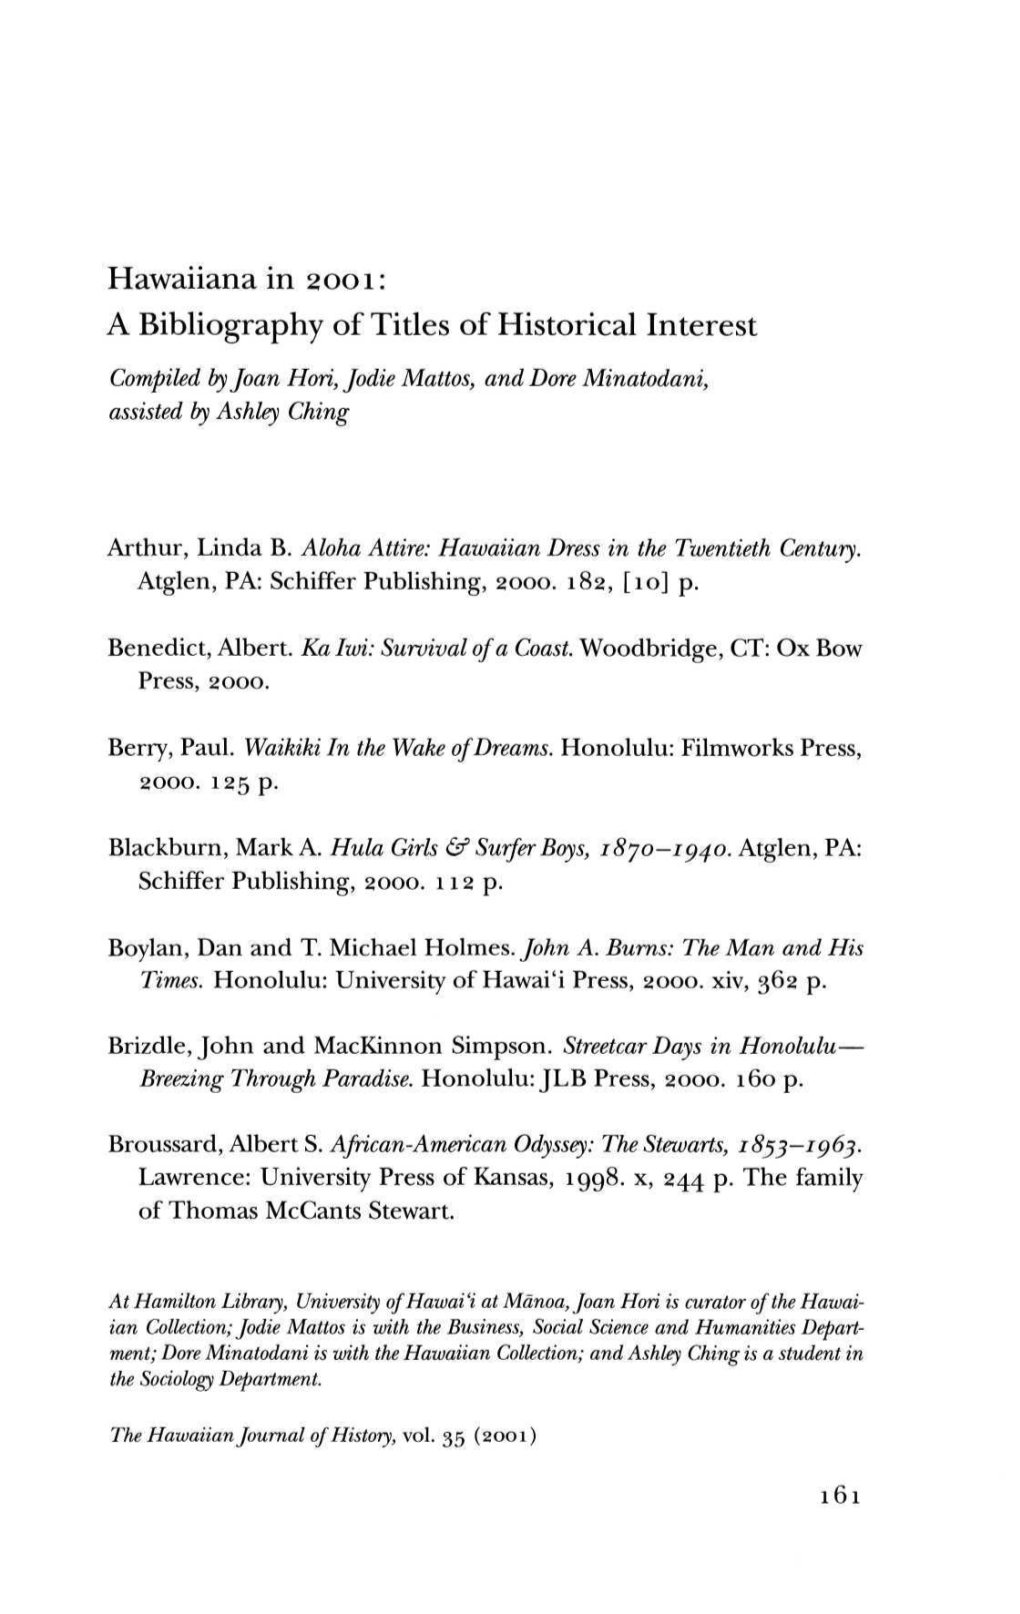 Hawaiiana in 2001: a Bibliography of Titles of Historical Interest Compiled by Joan Hori, Jodie Mattos, and Dore Minatodani, Assisted by Ashley Ching